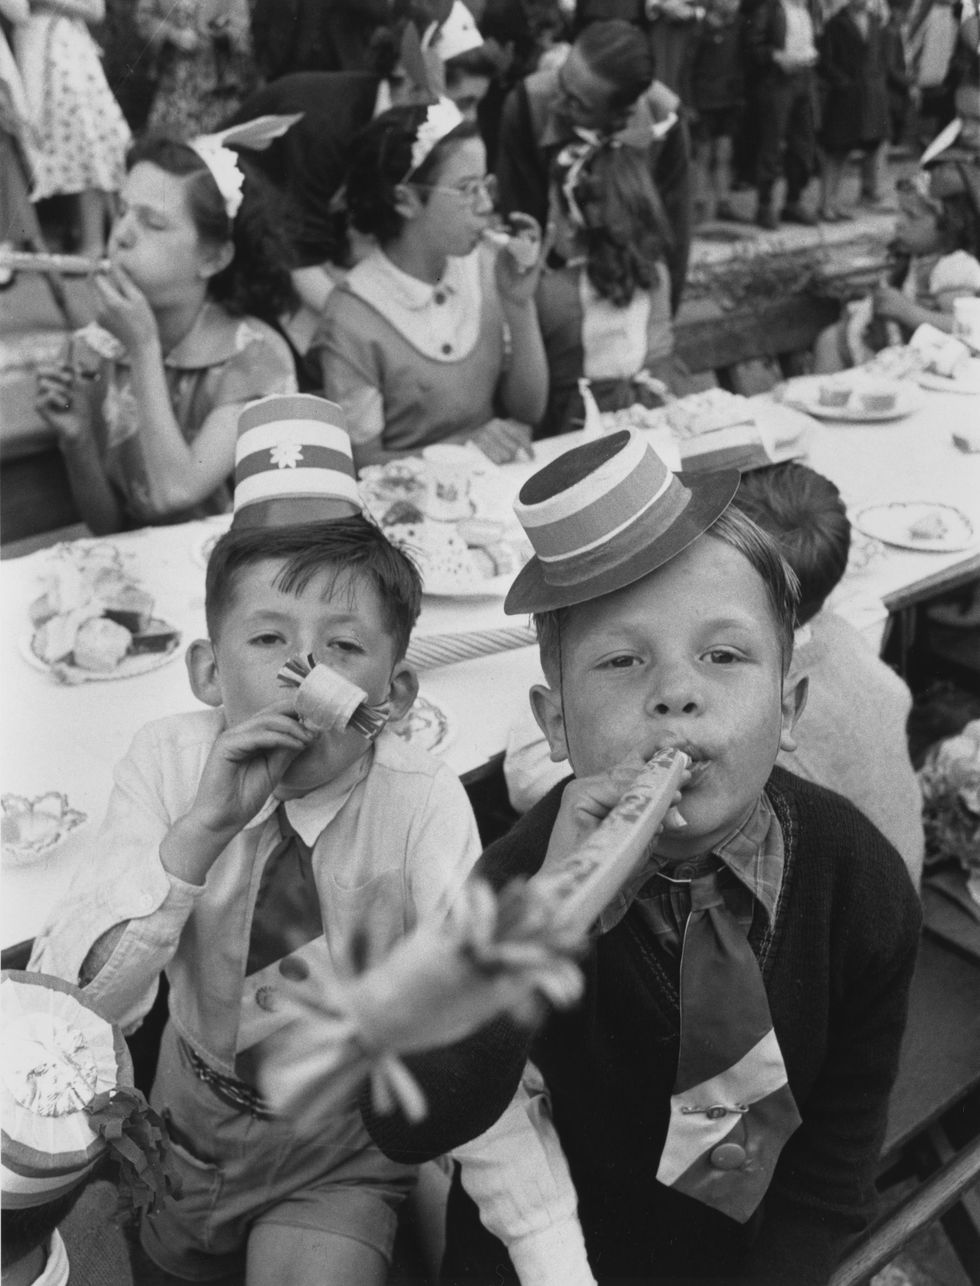 young boys blowing paper whistles at a street party held in morpeth street, london, during queen elizabeth ii's coronation celebration